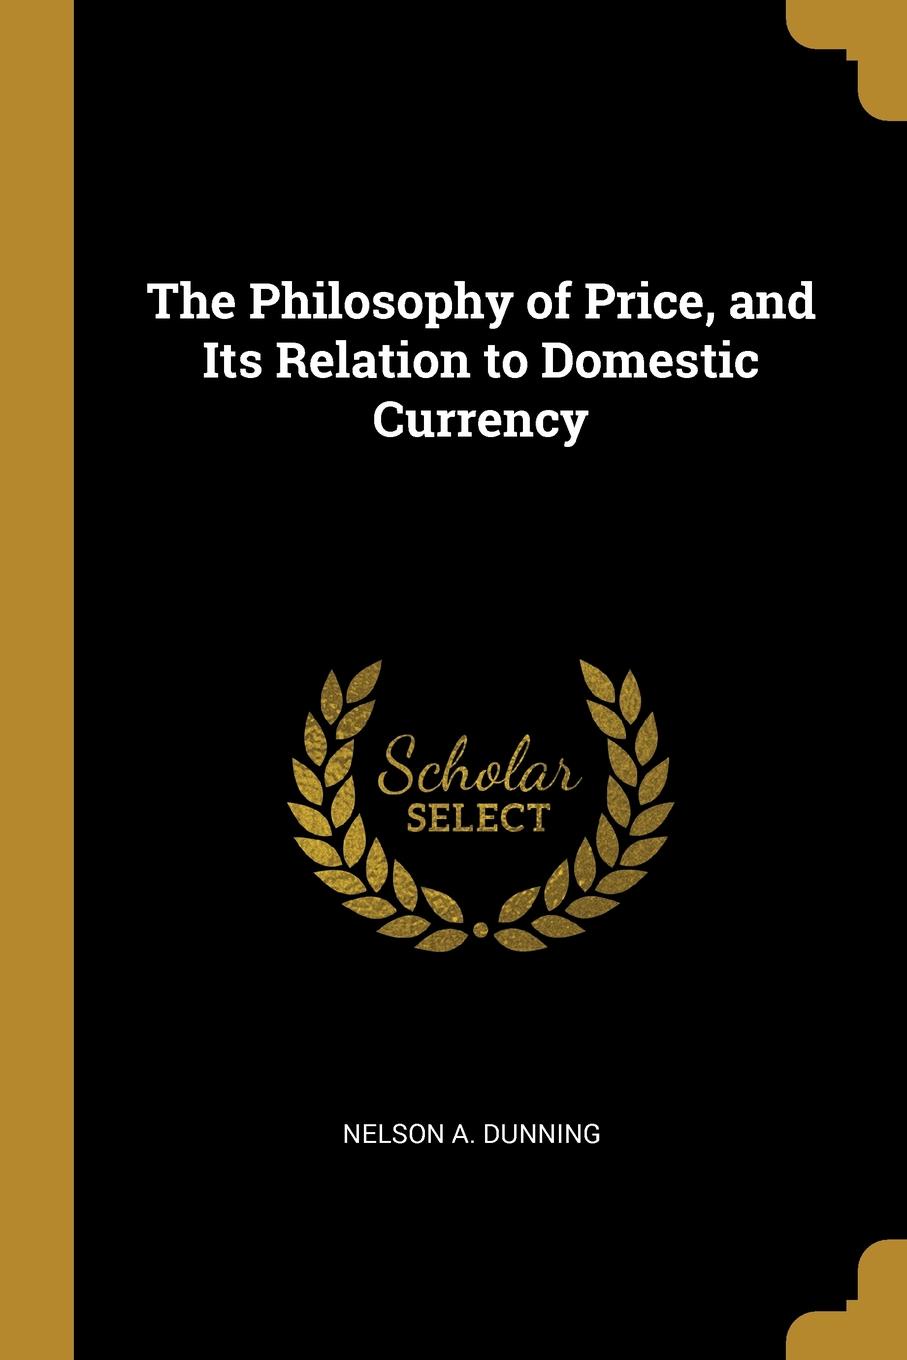 The Philosophy of Price, and Its Relation to Domestic Currency